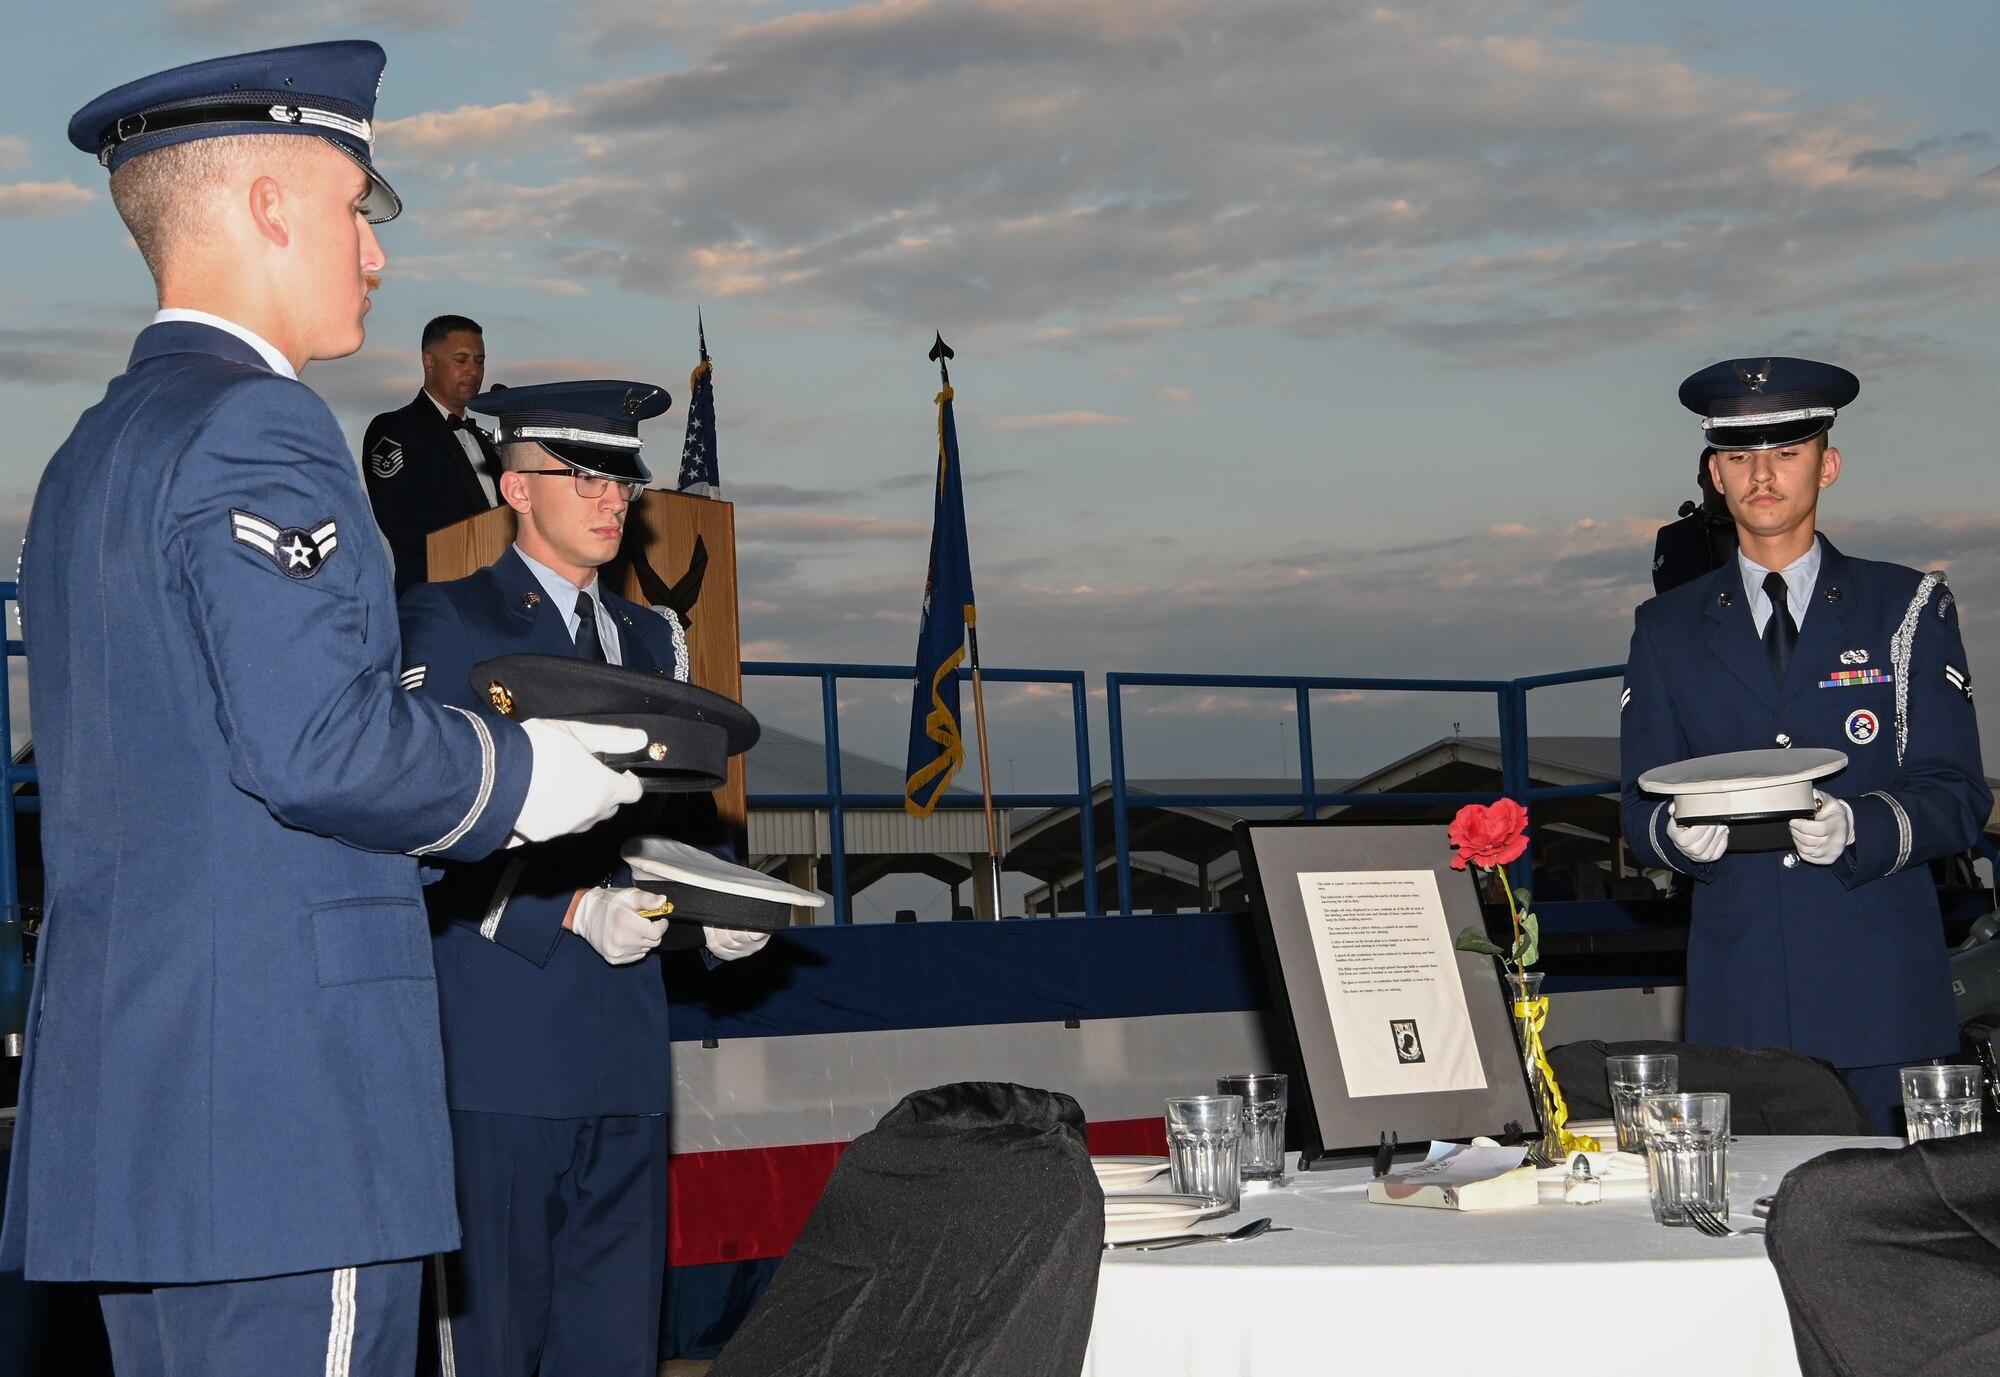 Members of Whiteman Honor Guard present the different wheel caps of the four military branches at the Air Force Ball at Whiteman Air Force Base, Missouri, September 16, 2022. The POW-MIA table ceremony acknowledges those who were POWs or MIA from all four branches of military. (U.S. Air Force photo by Airman 1st Class Joseph Garcia)